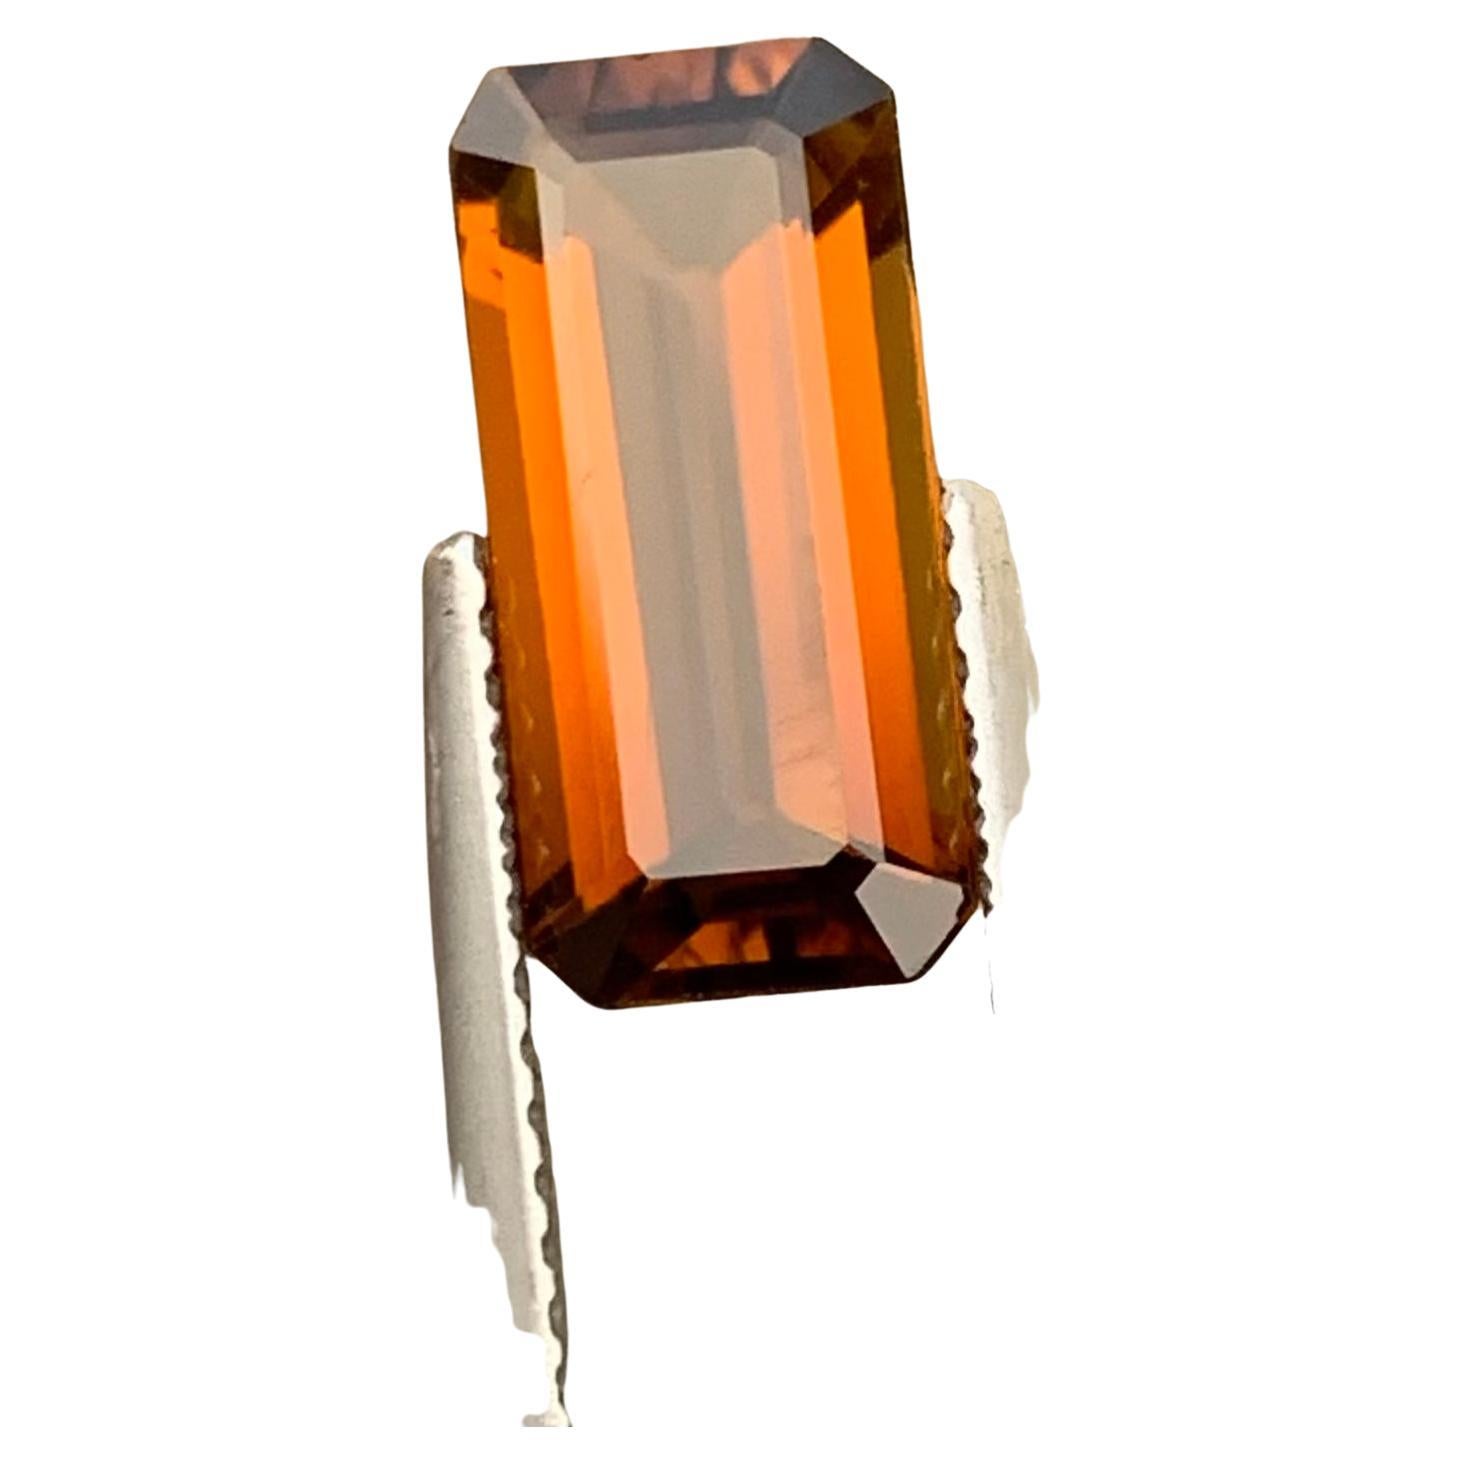 2.30 Carats Natural Faceted Tourmaline Emerald Cut From Congo Mine  For Sale